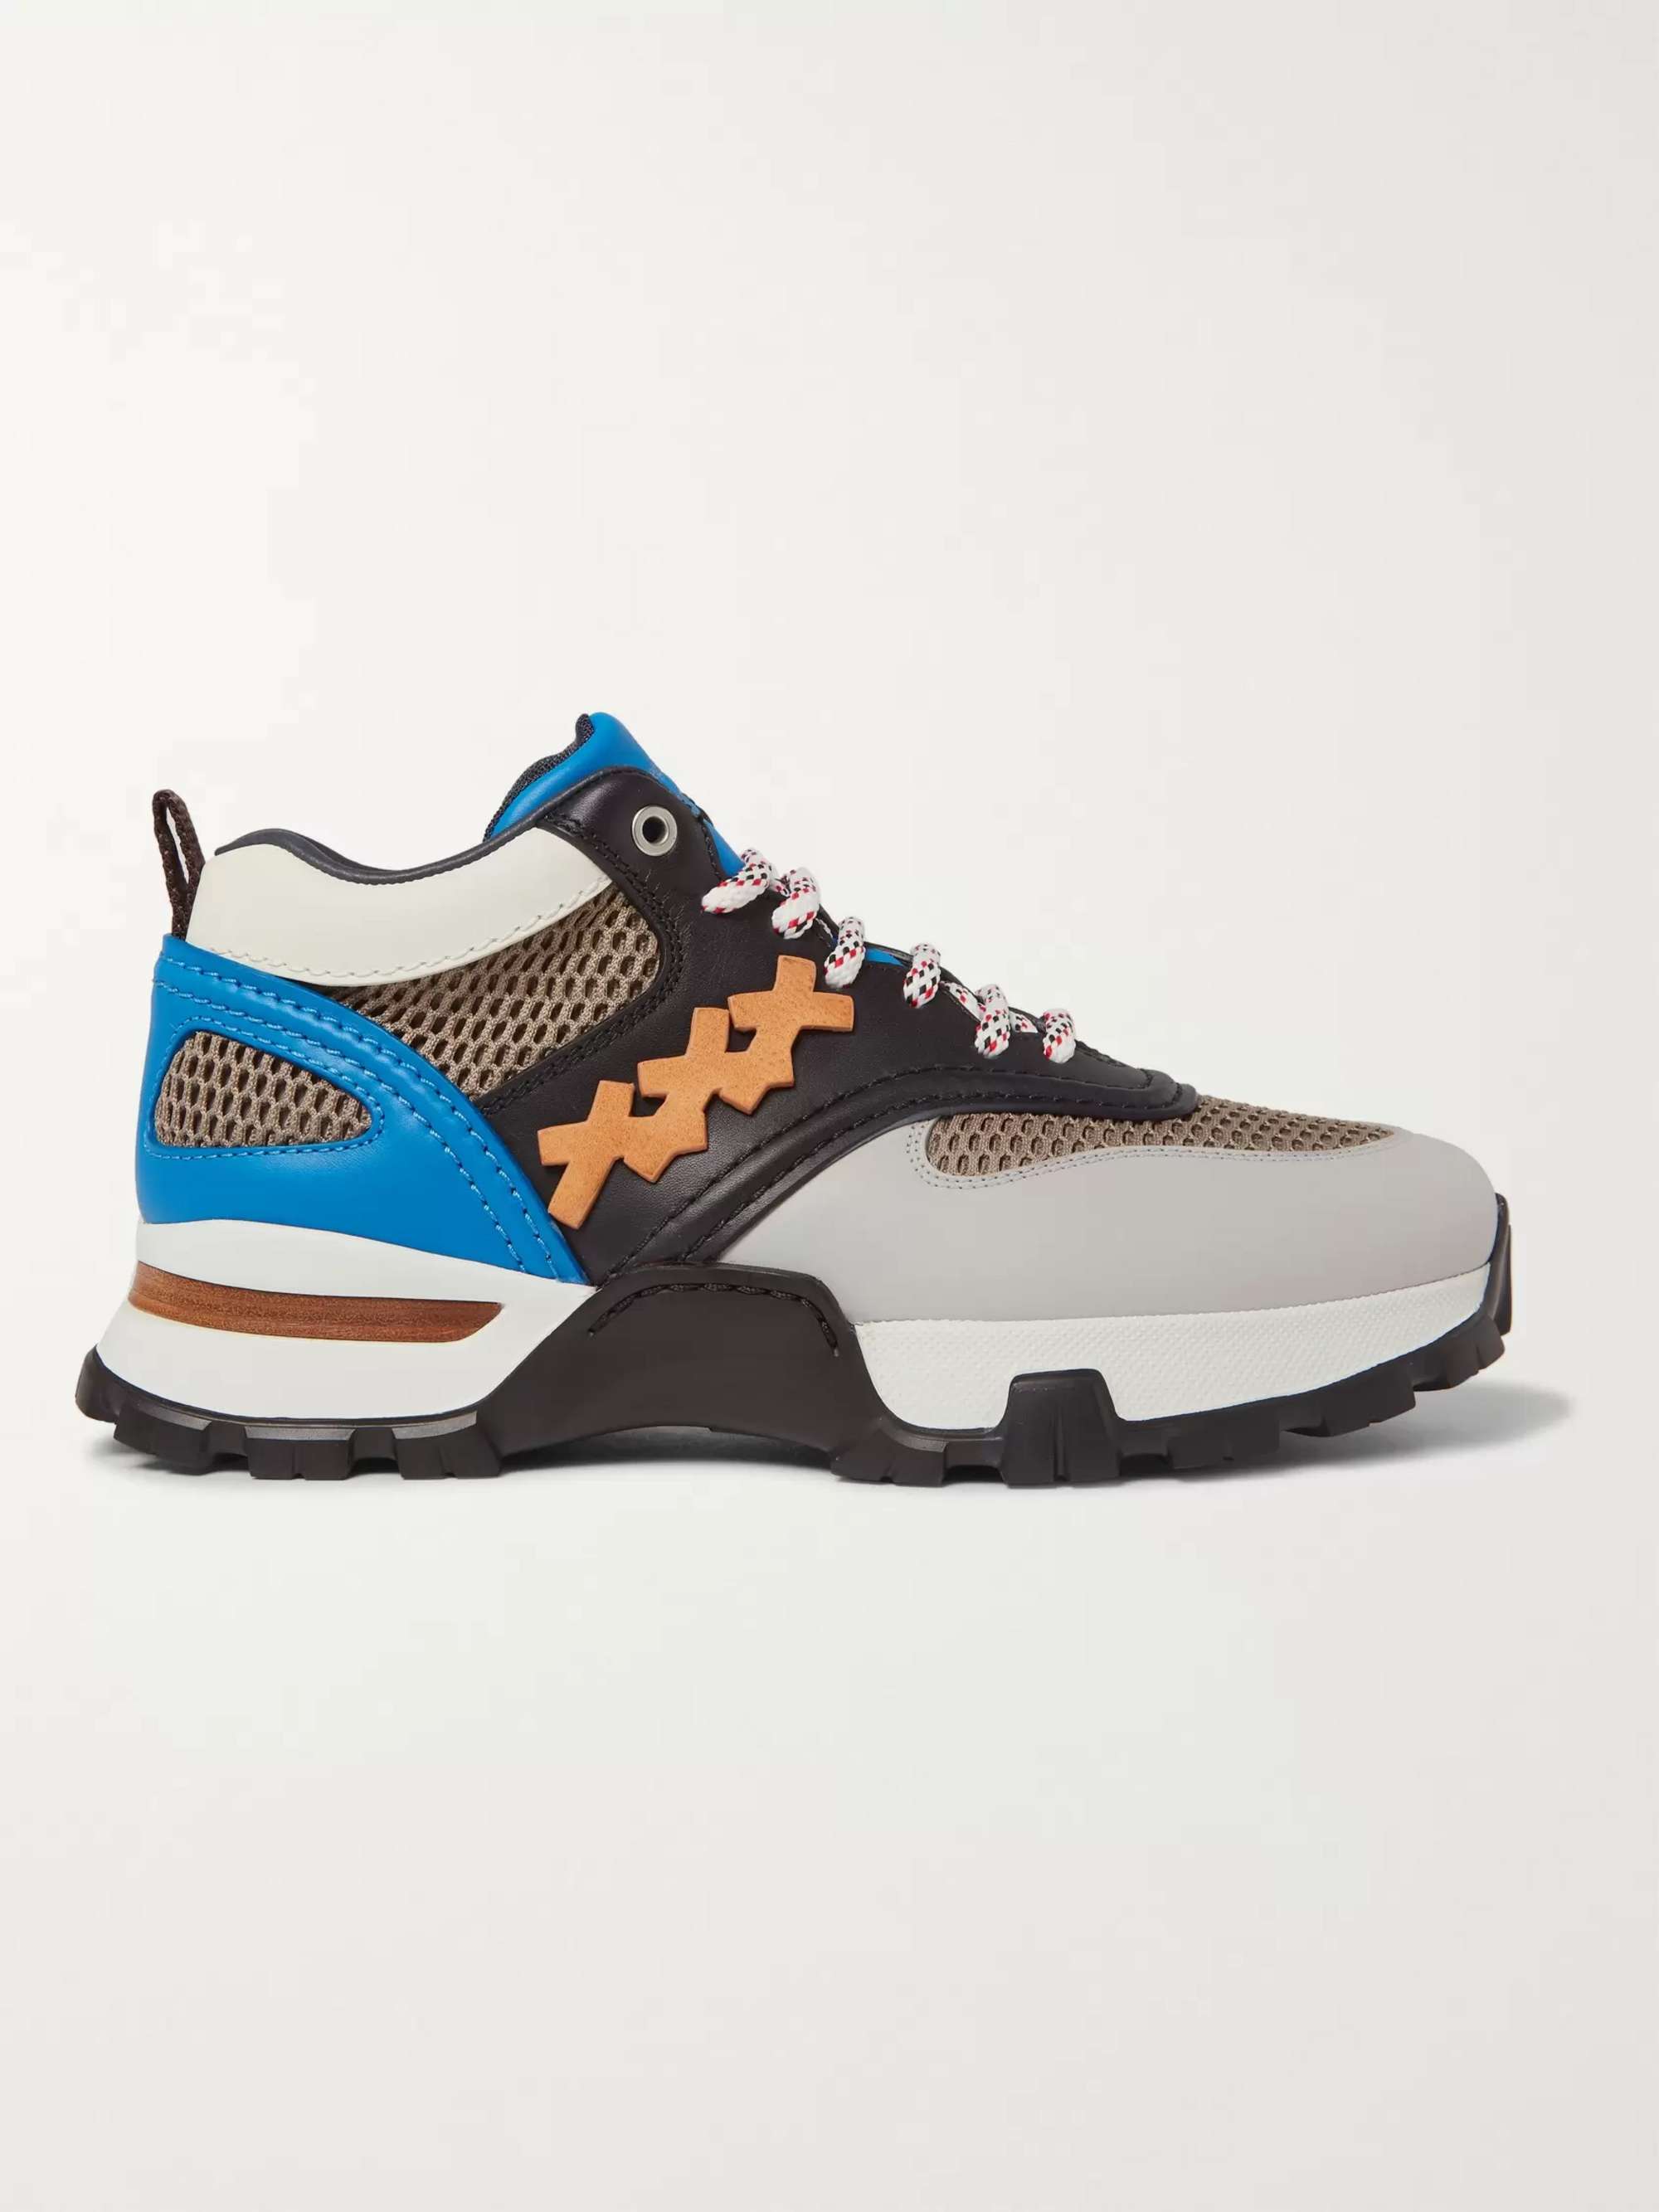 ZEGNA Cesare Leather and Mesh Sneakers | MR PORTER